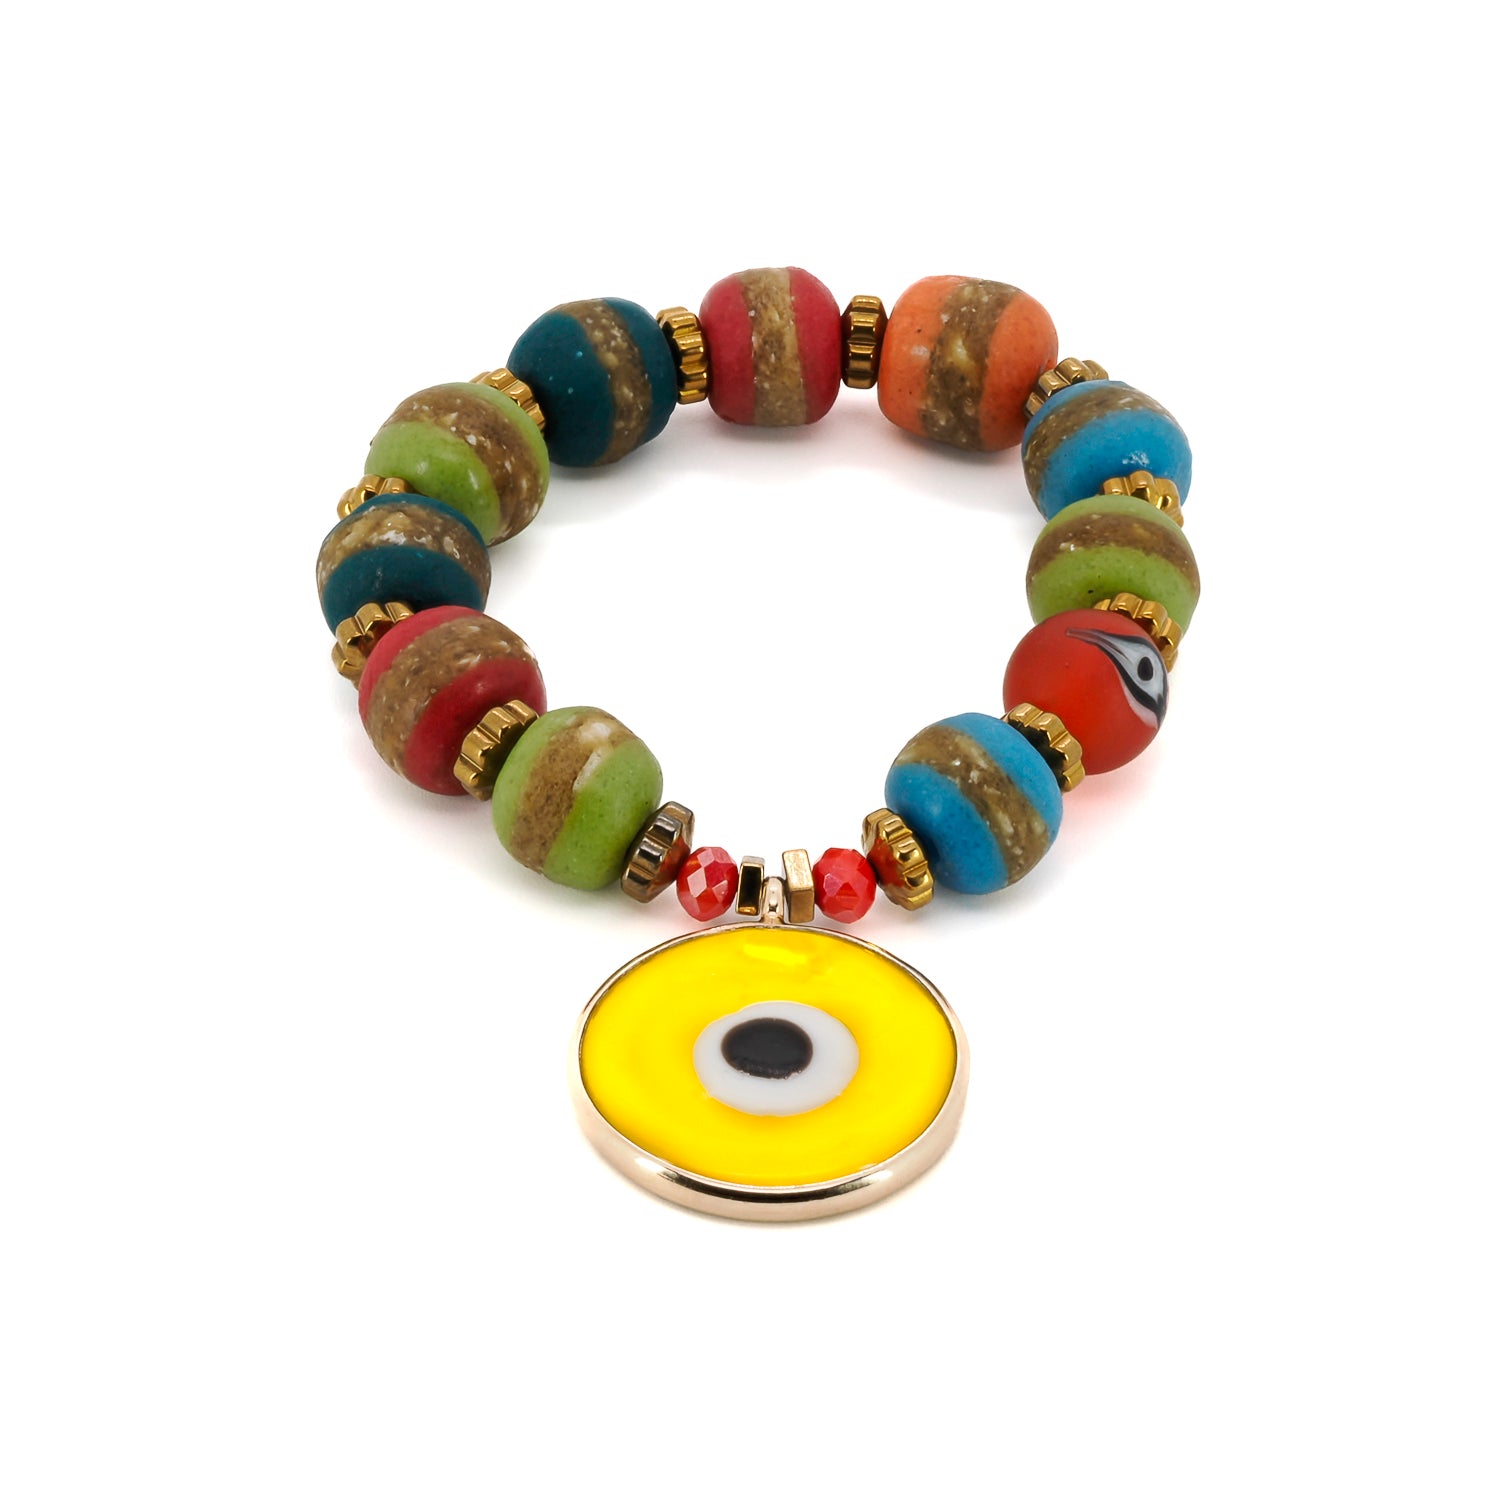 The Yellow Evil Eye Carpe Diem Bracelet, a vibrant and eye-catching handmade accessory that radiates positivity and style